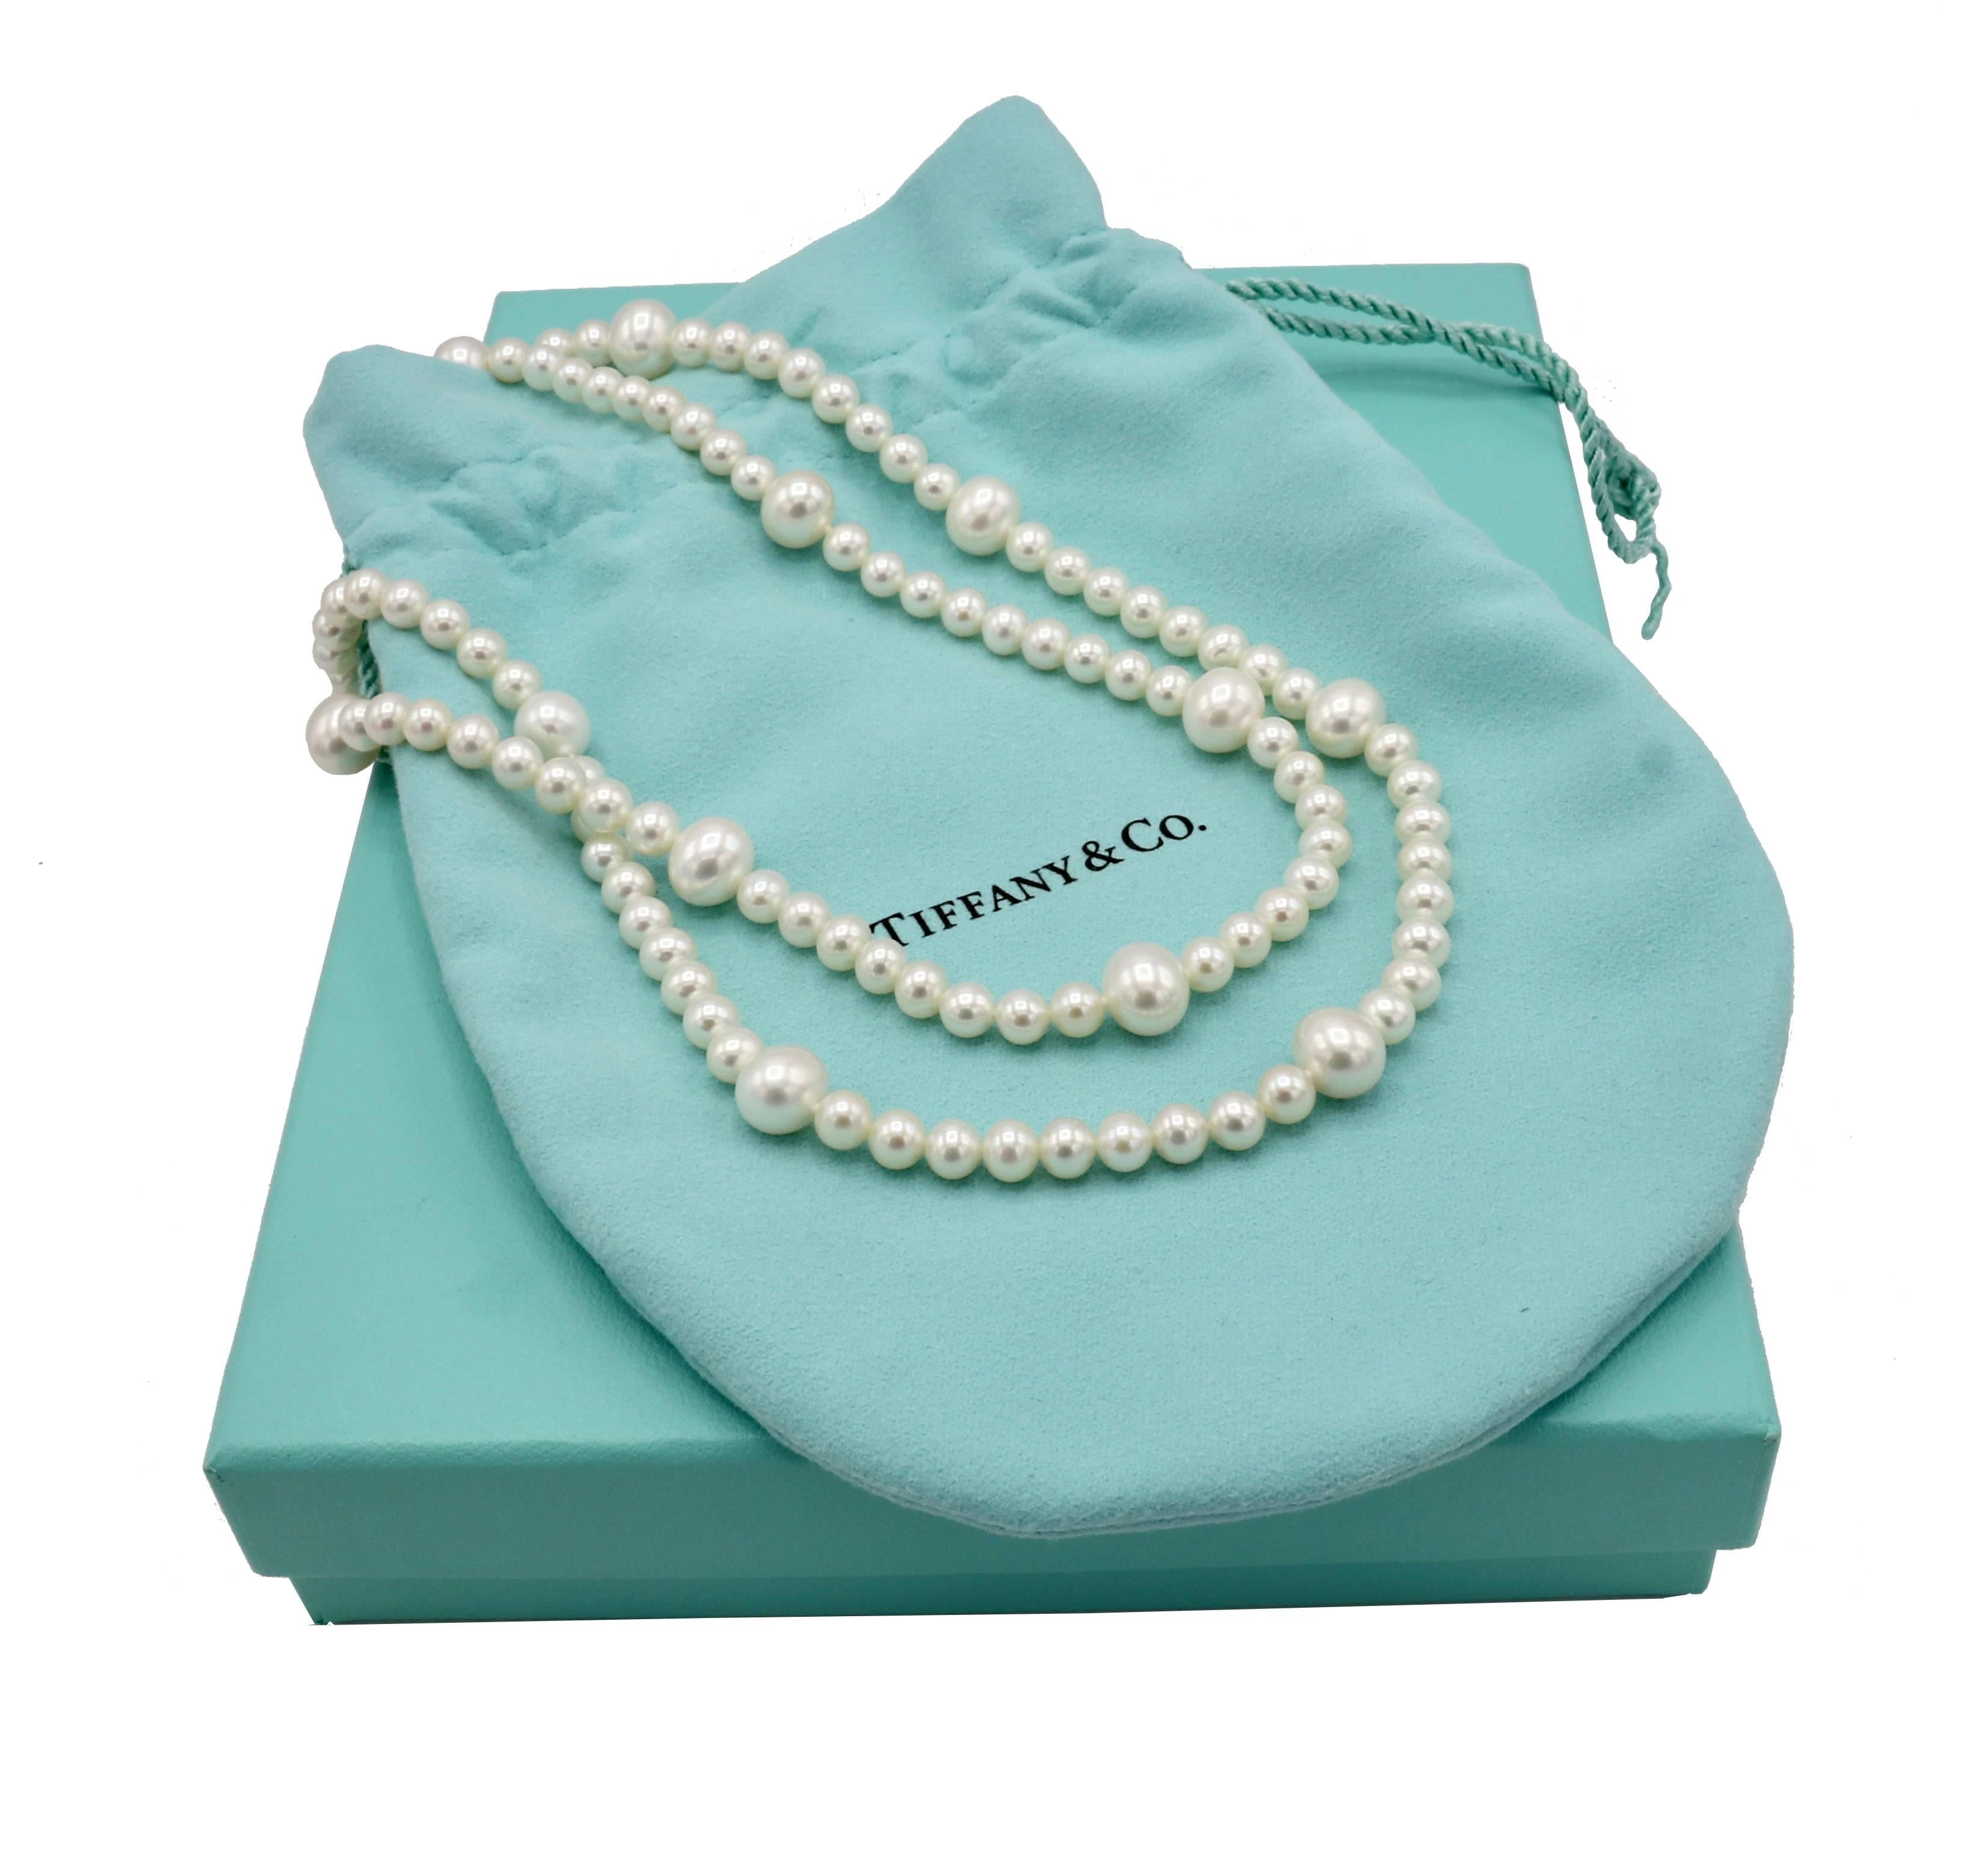 Tiffany & Co. Sterling Silver Pearl Necklace 
Metal: Sterling silver 925
Weight: 45 grams
Length: 31 inches
Pearls: 5.5 - 9.5mm
Signed: ©T&Co. AG925 Tiffany & Co. 
Notes: Box & Pouch 